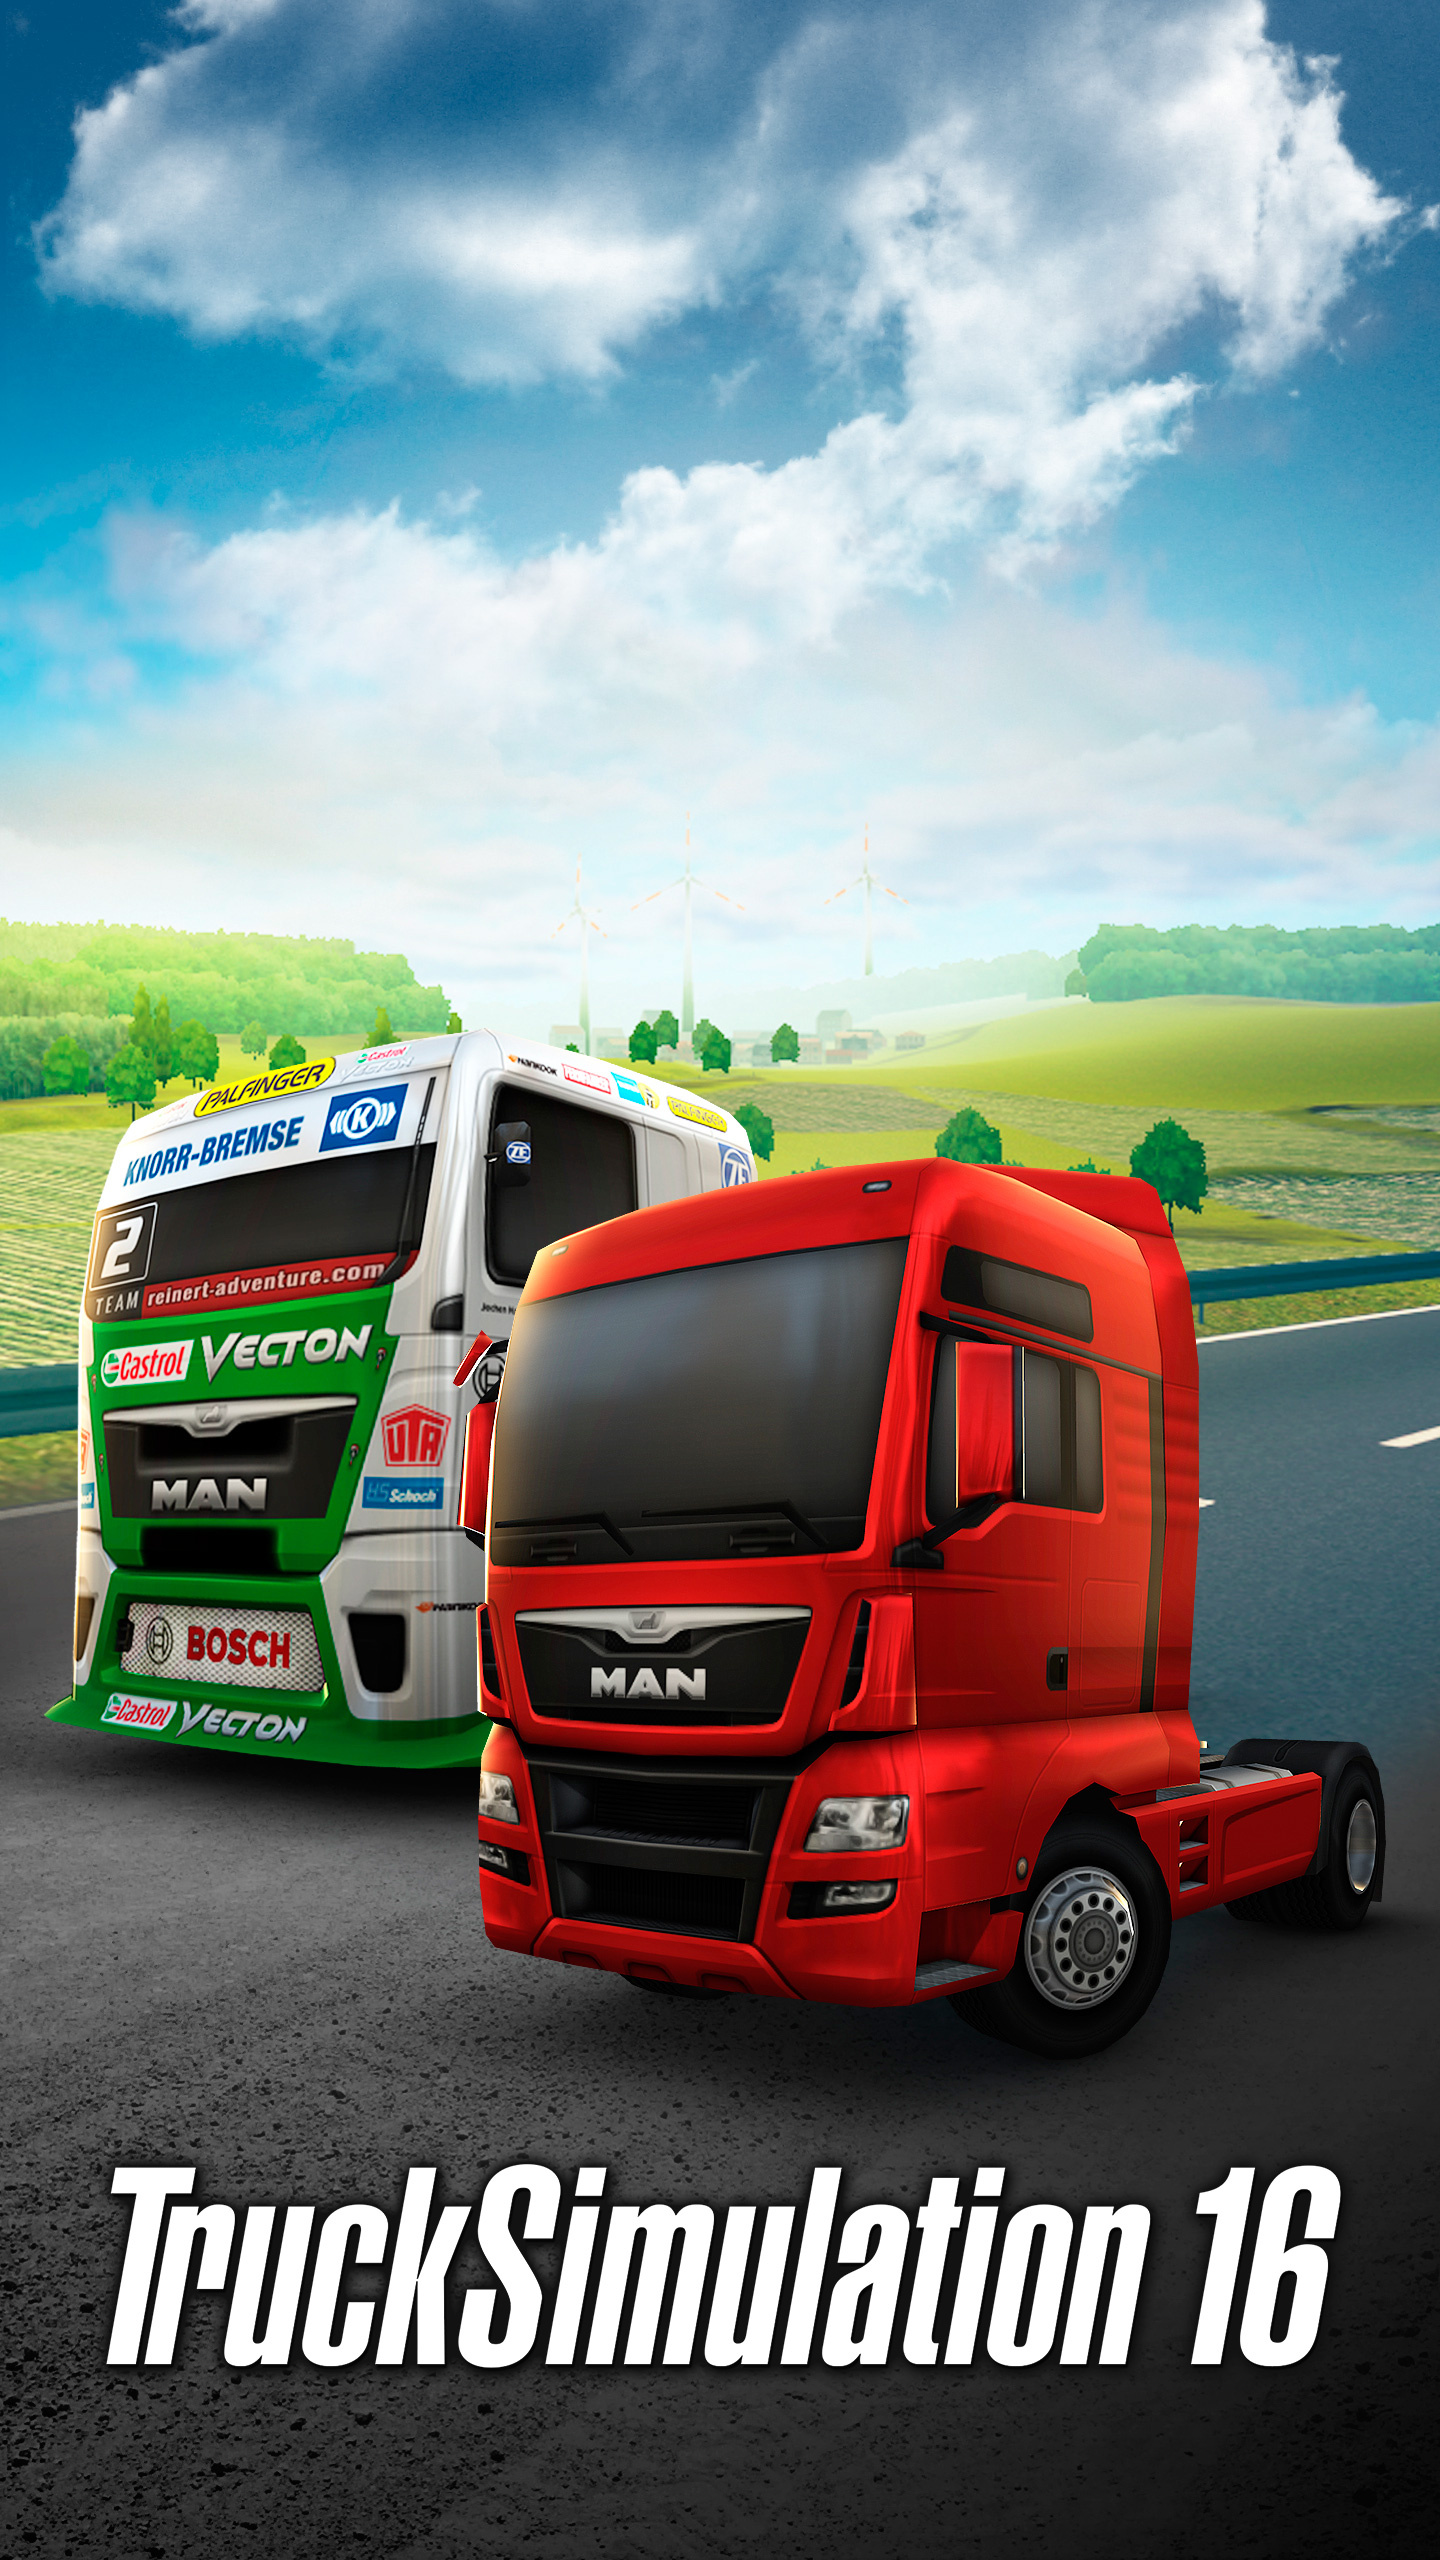 Simulation Game, Gaming, Truck simulation, Open road adventure, 1440x2560 HD Handy